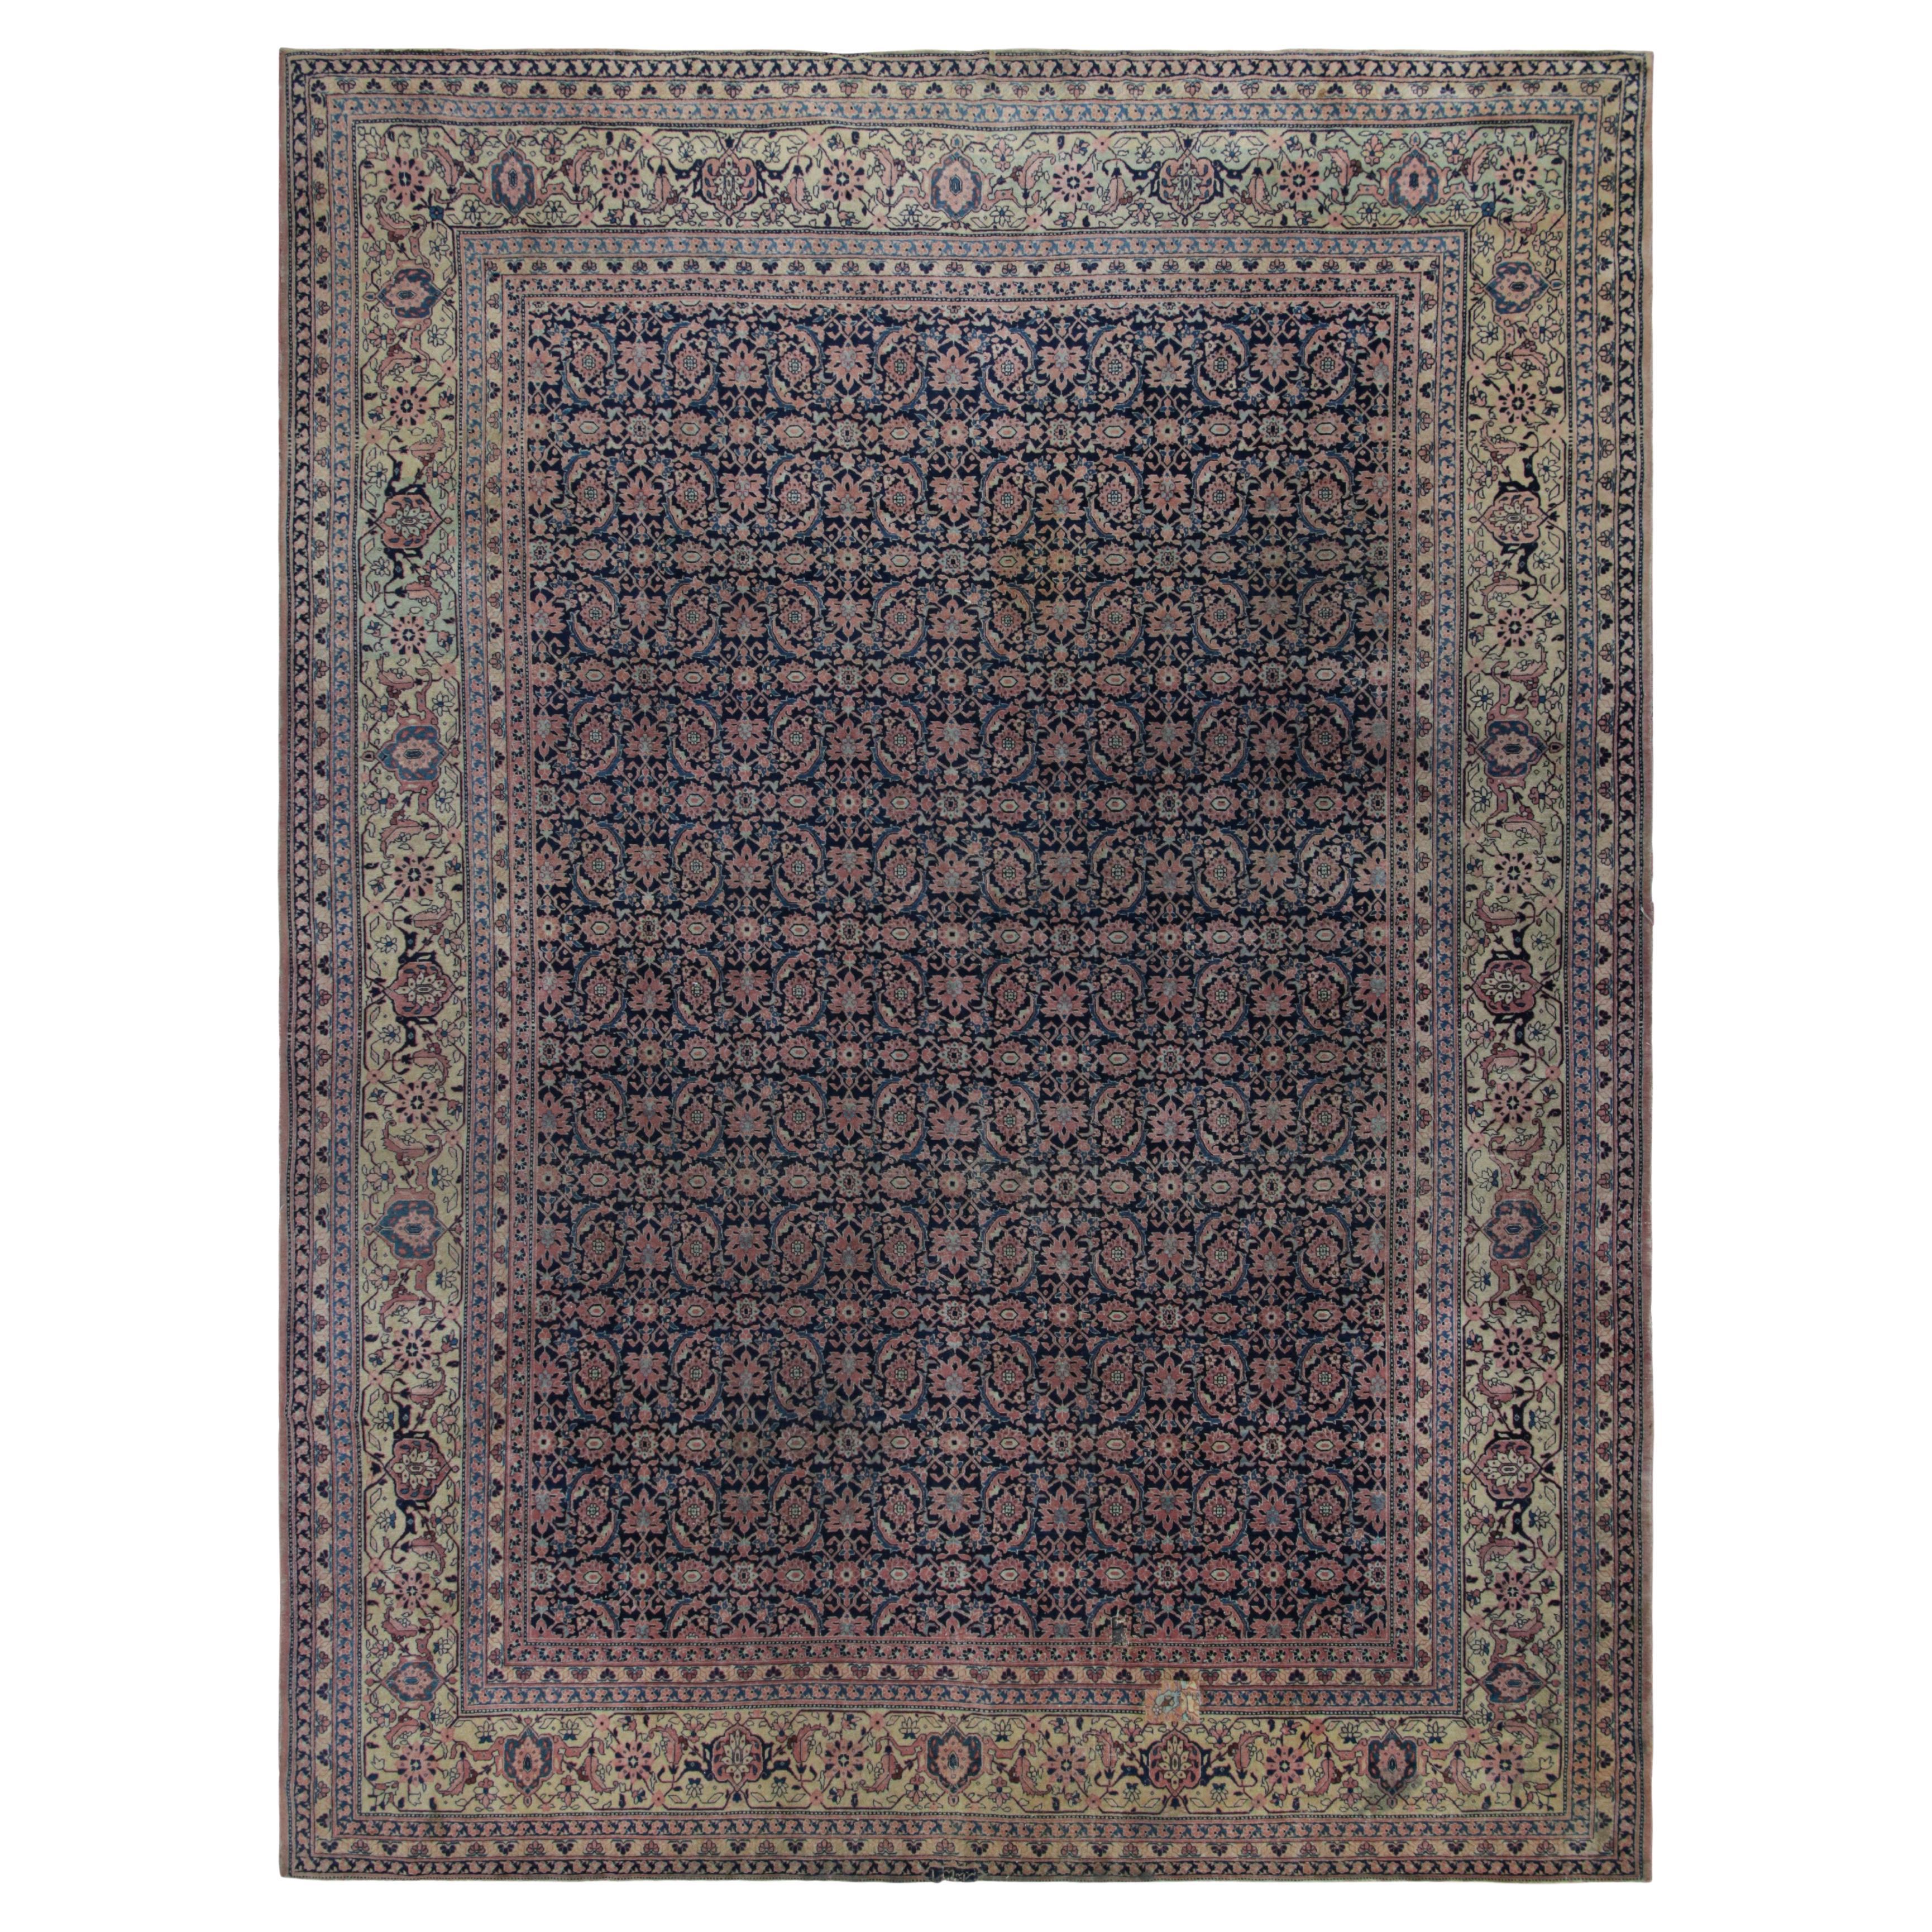 Antique Khorassan Rug in Navy Blue and Gold with Floral Patterns by Rug & Kilim For Sale